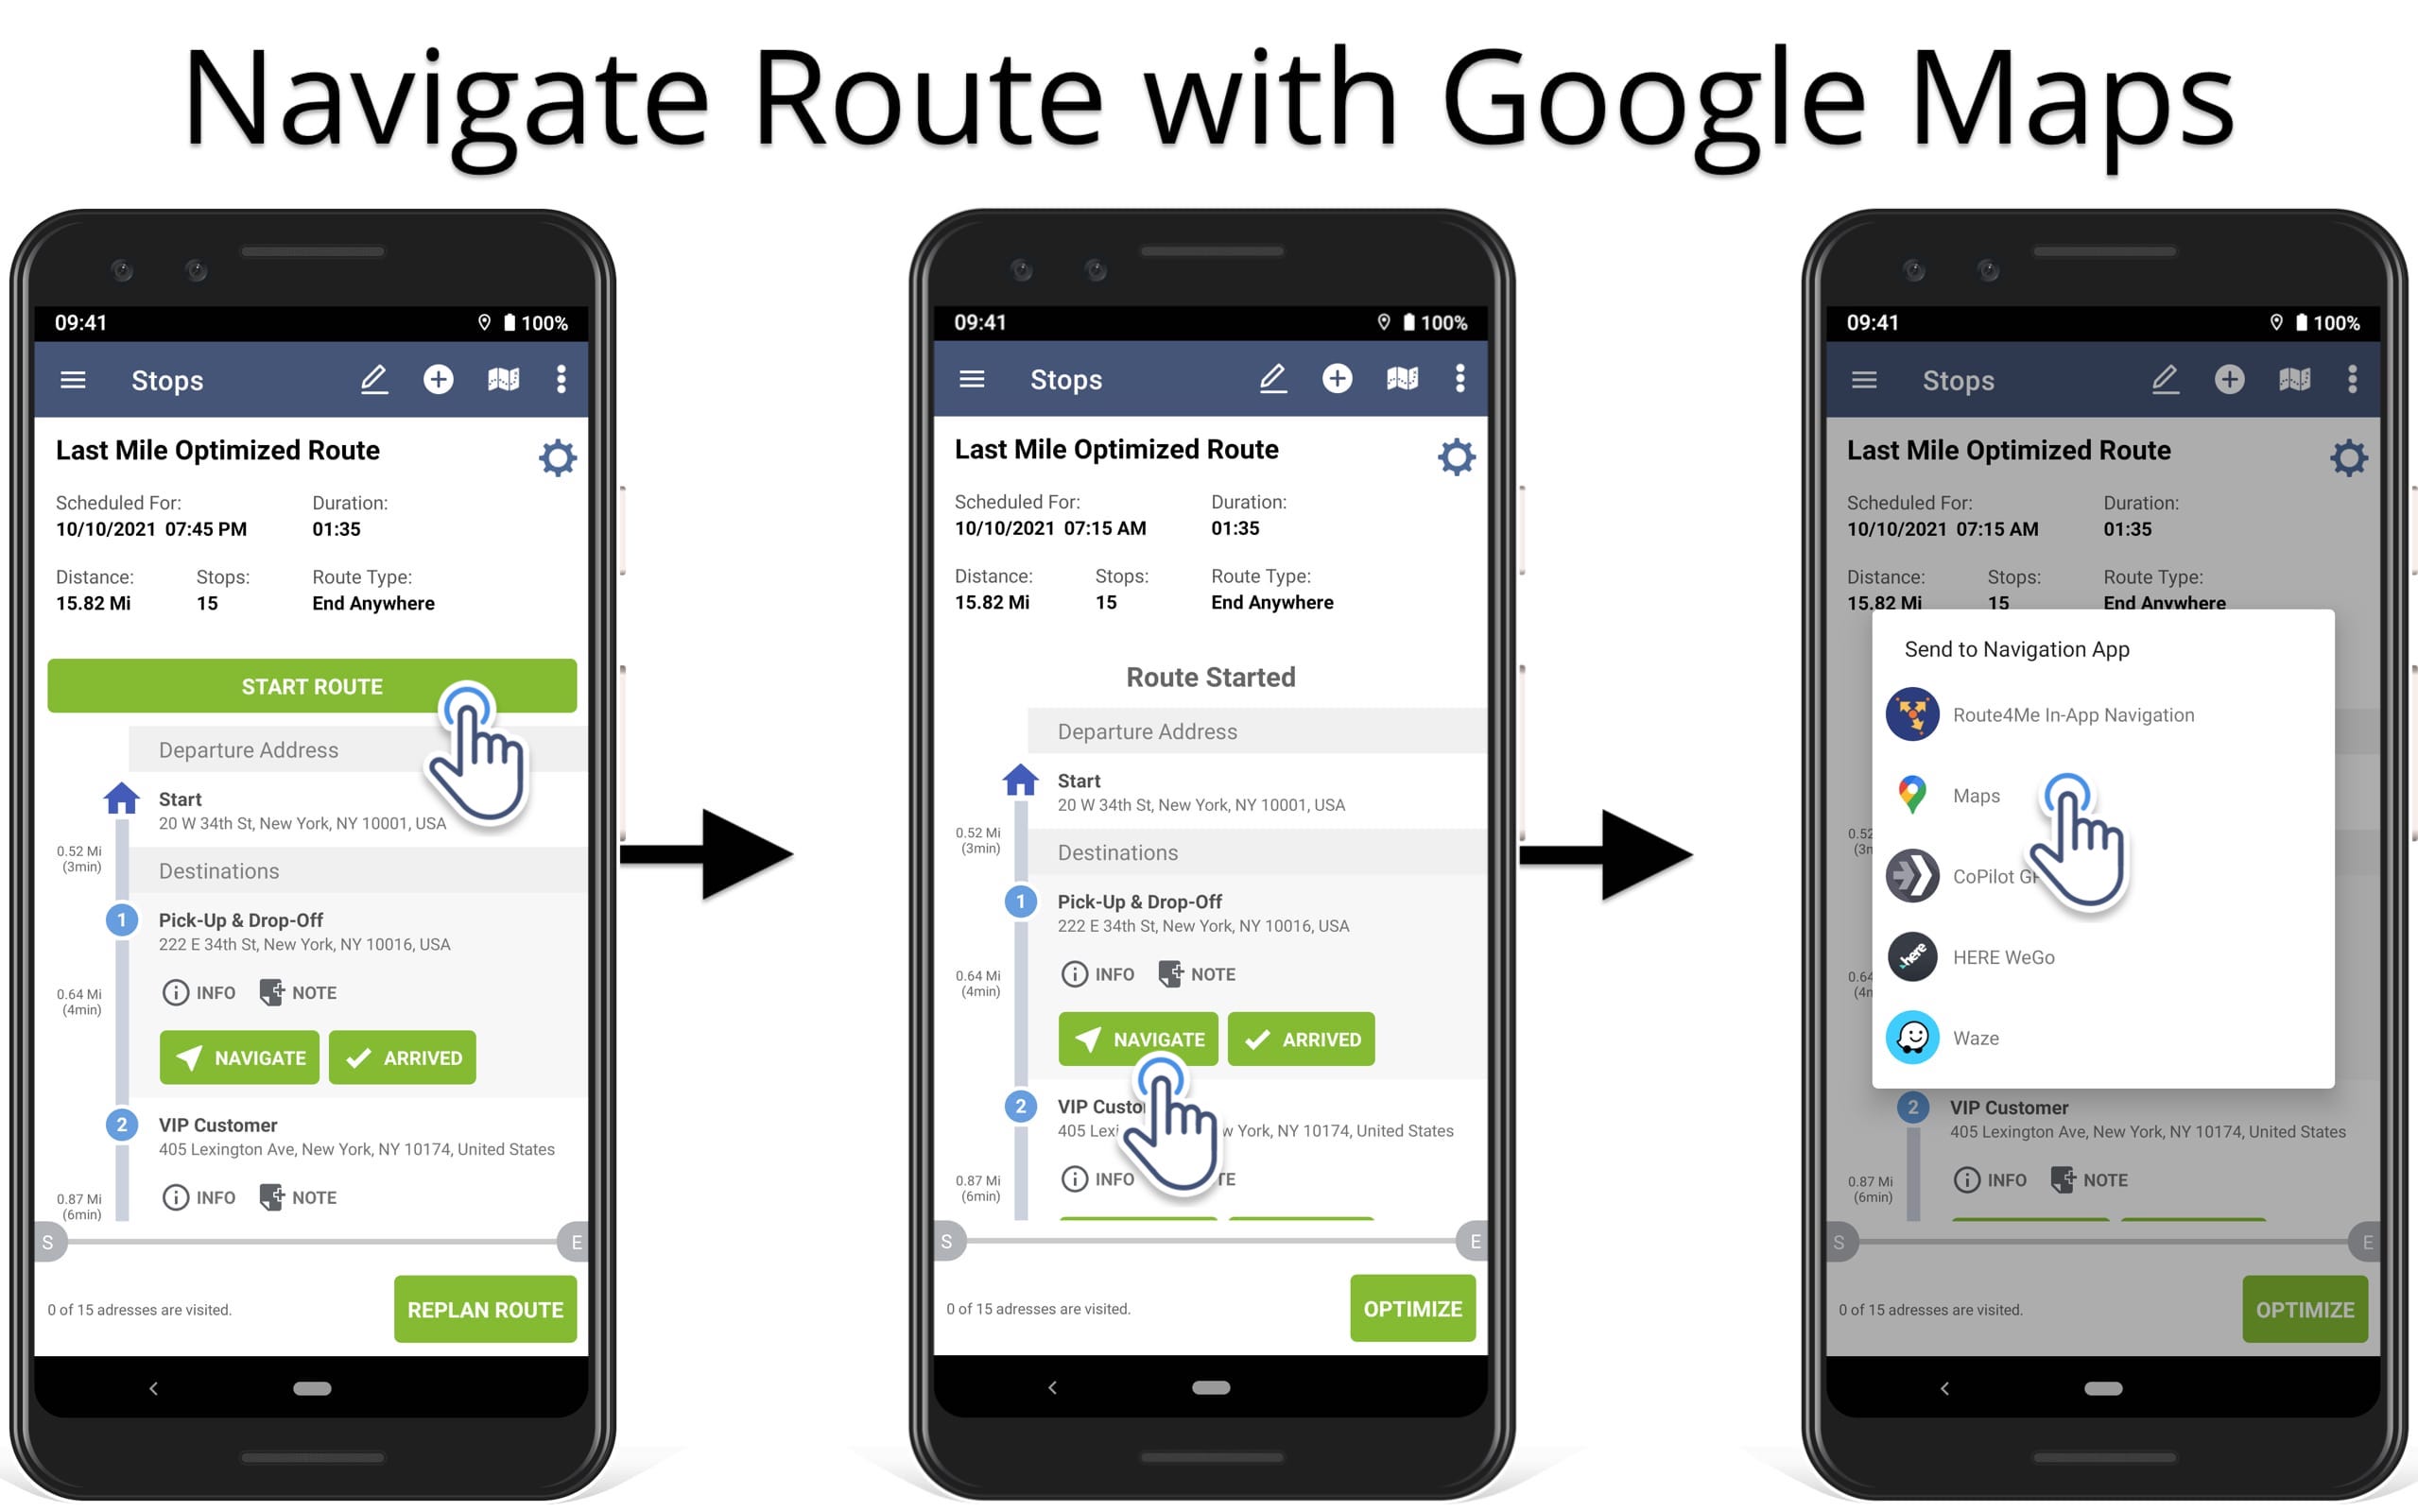 Navigate routes planned on the route planner app using the Google Maps navigation.